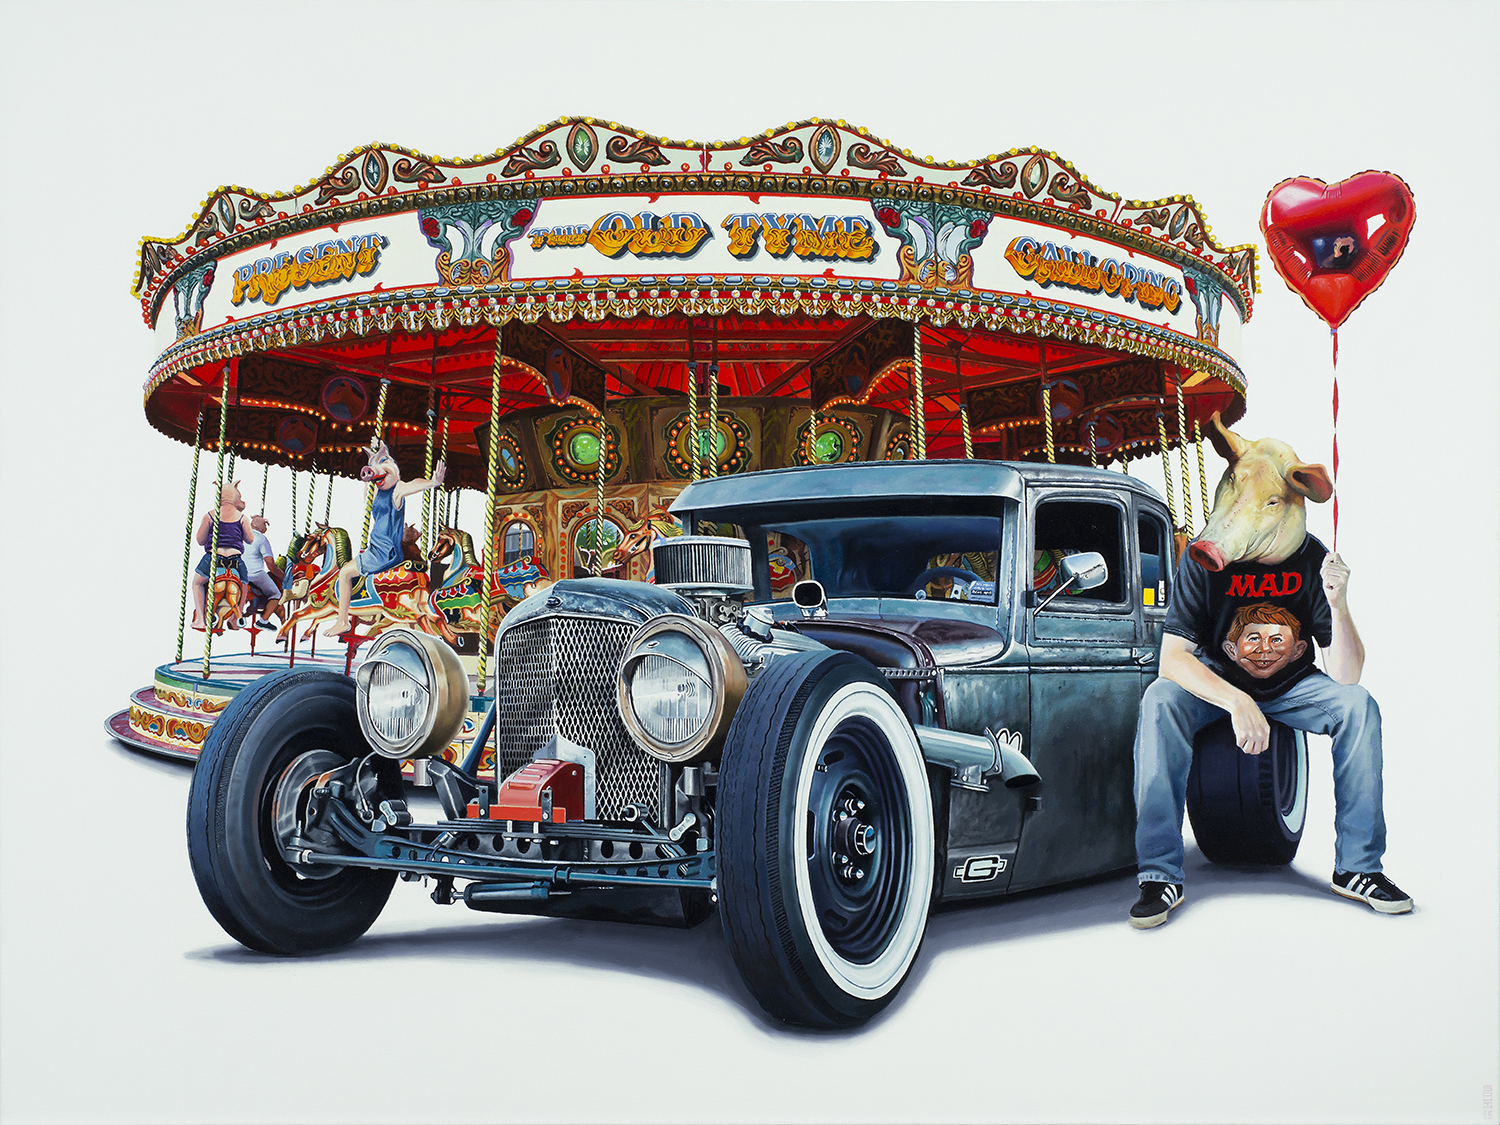 A man with a pigs head seated on a hot rod in front of a merry-go-round -- Tony South - 368 Horses